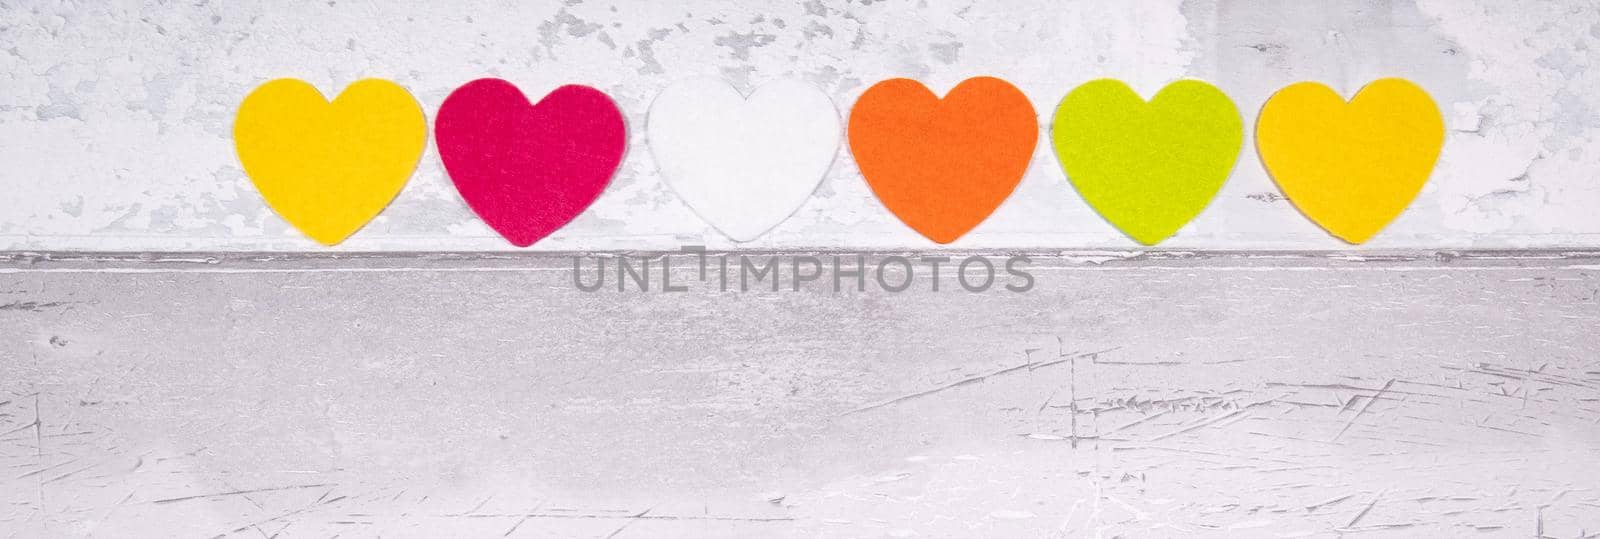 Colorful felt hearts on a background of old wooden planks resembling an old parquet floor. Concept of valentine's day and love in general by jp_chretien